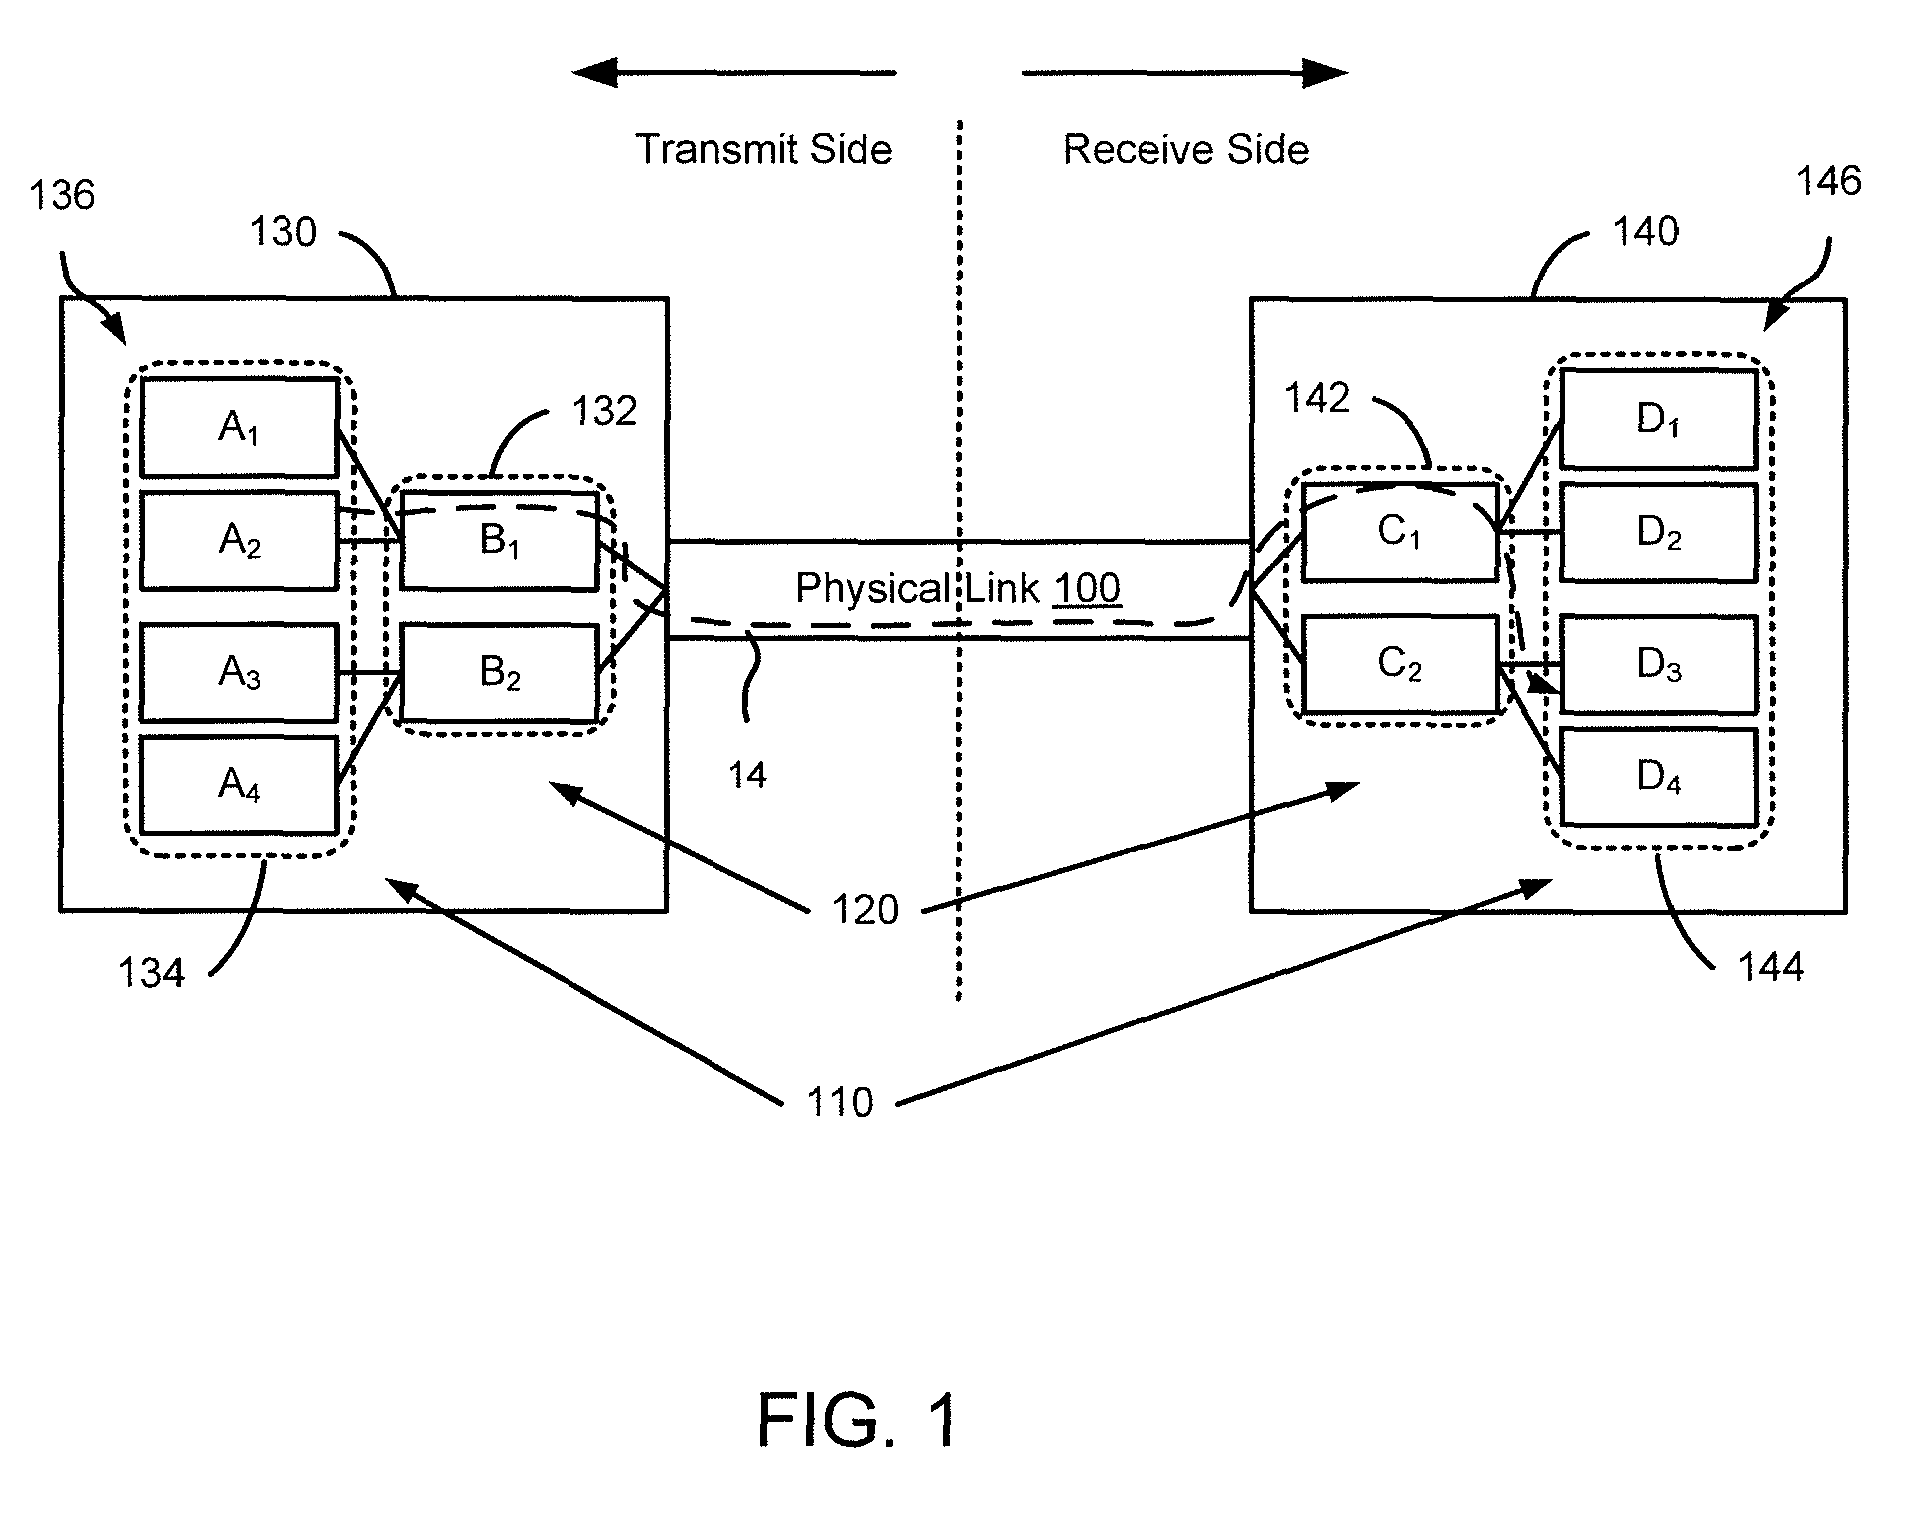 Methods and apparatus for flow control associated with multi-staged queues